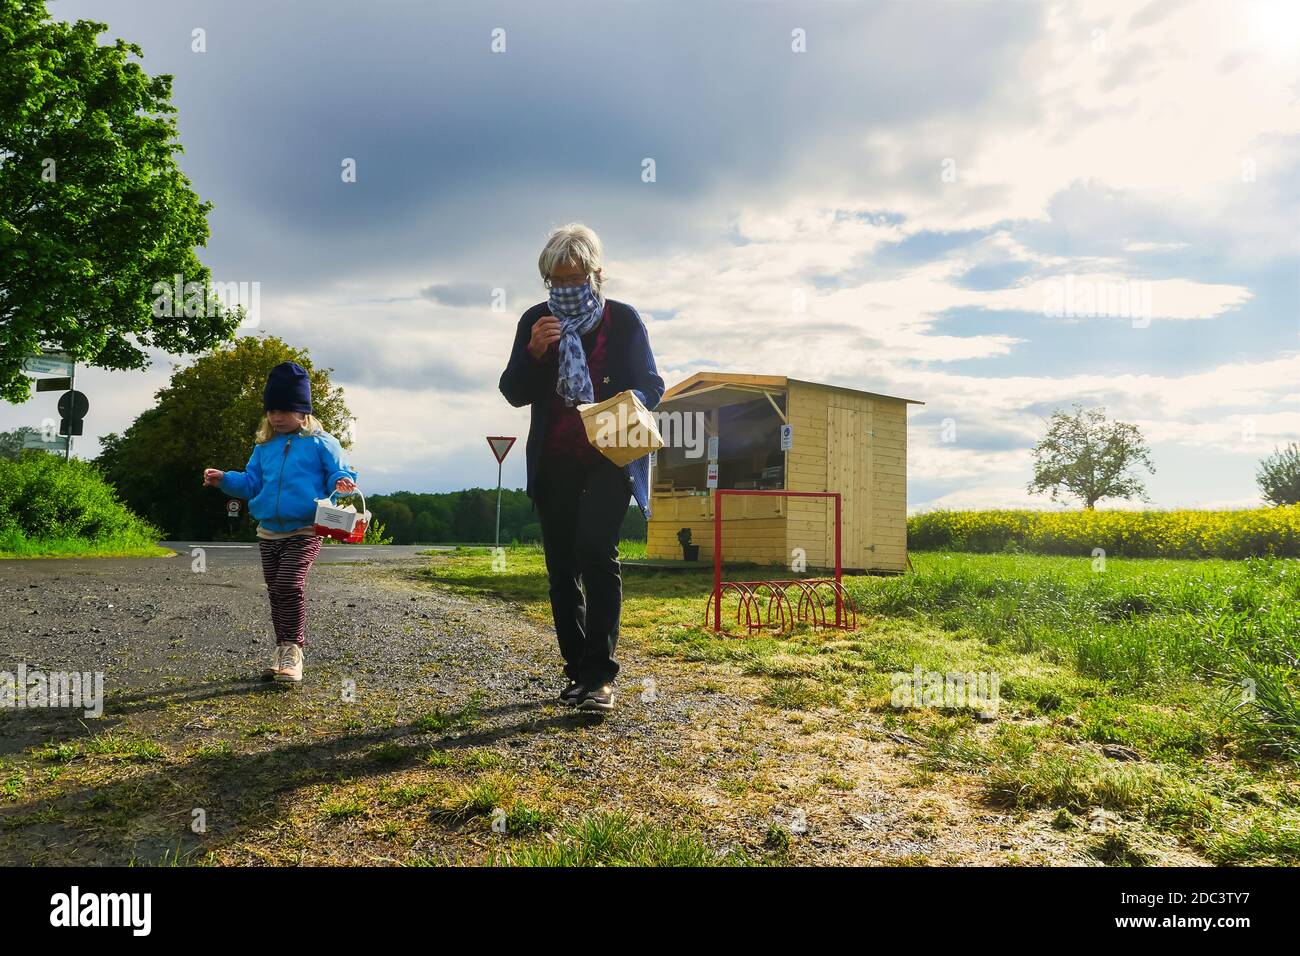 Child and grandmother walking on road in rural area. Long shot. Stock Photo